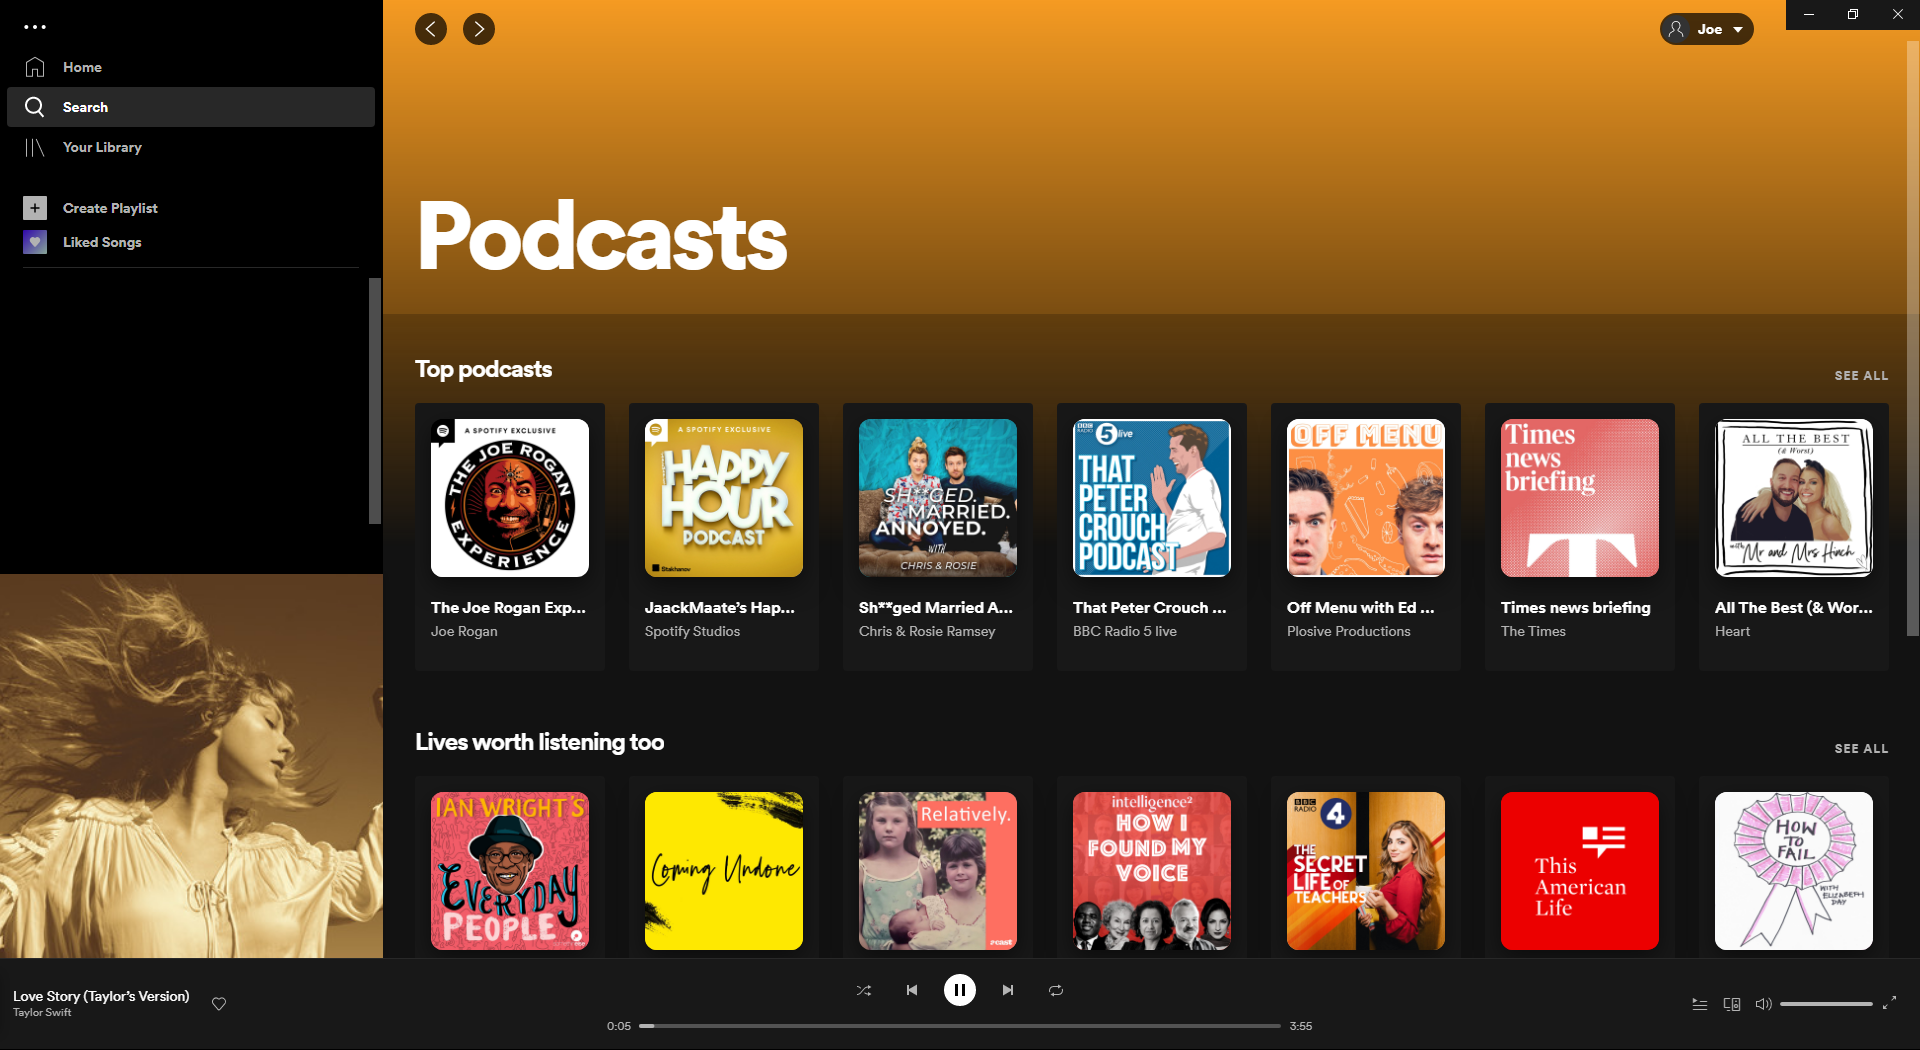 spotify podcasts not showing up 2021